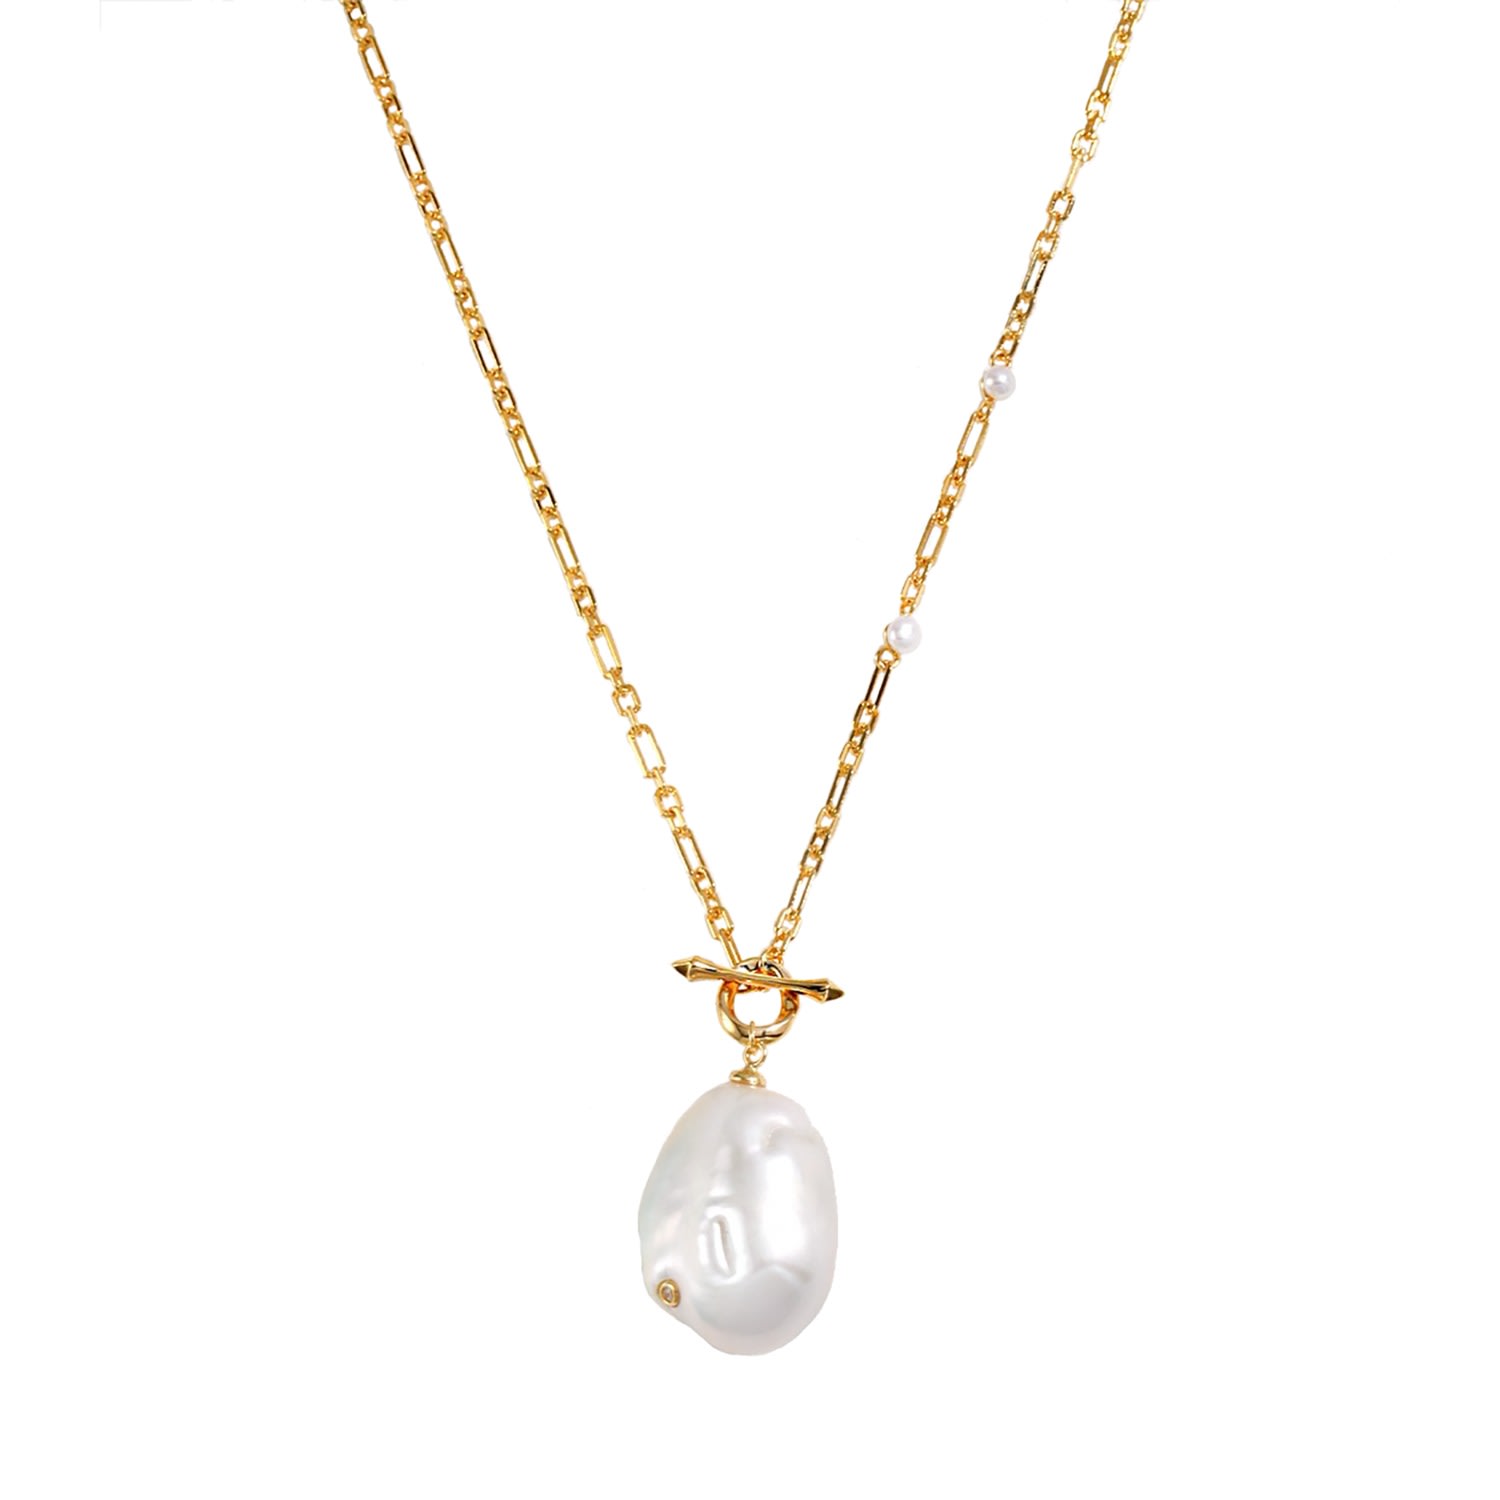 Women’s Baroque Pearl Pendant Gold Chain Necklace Ms. Donna